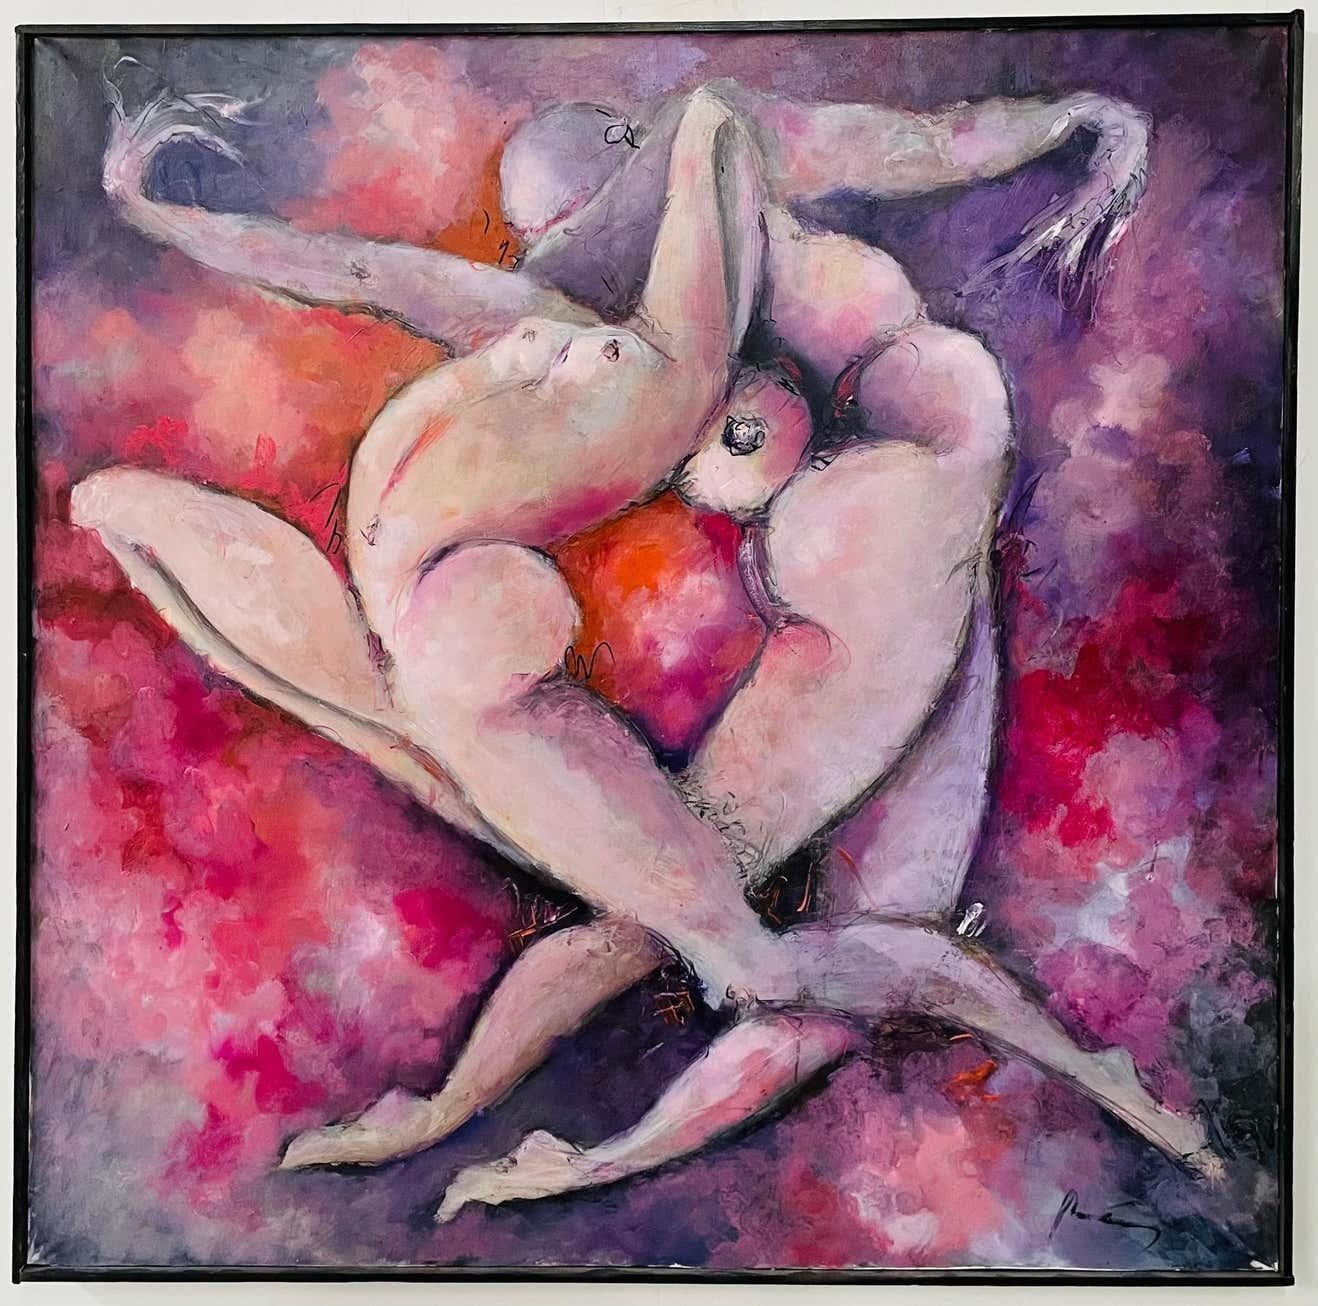 An exceptional large oil on canvas painting by the Italian artist Marcello Reboani (Italy, Rom, Born 1957). The painting shows two nude bodies intertwined in space in red, purple and pink color tones enhancing the passionate vibe of the art work.